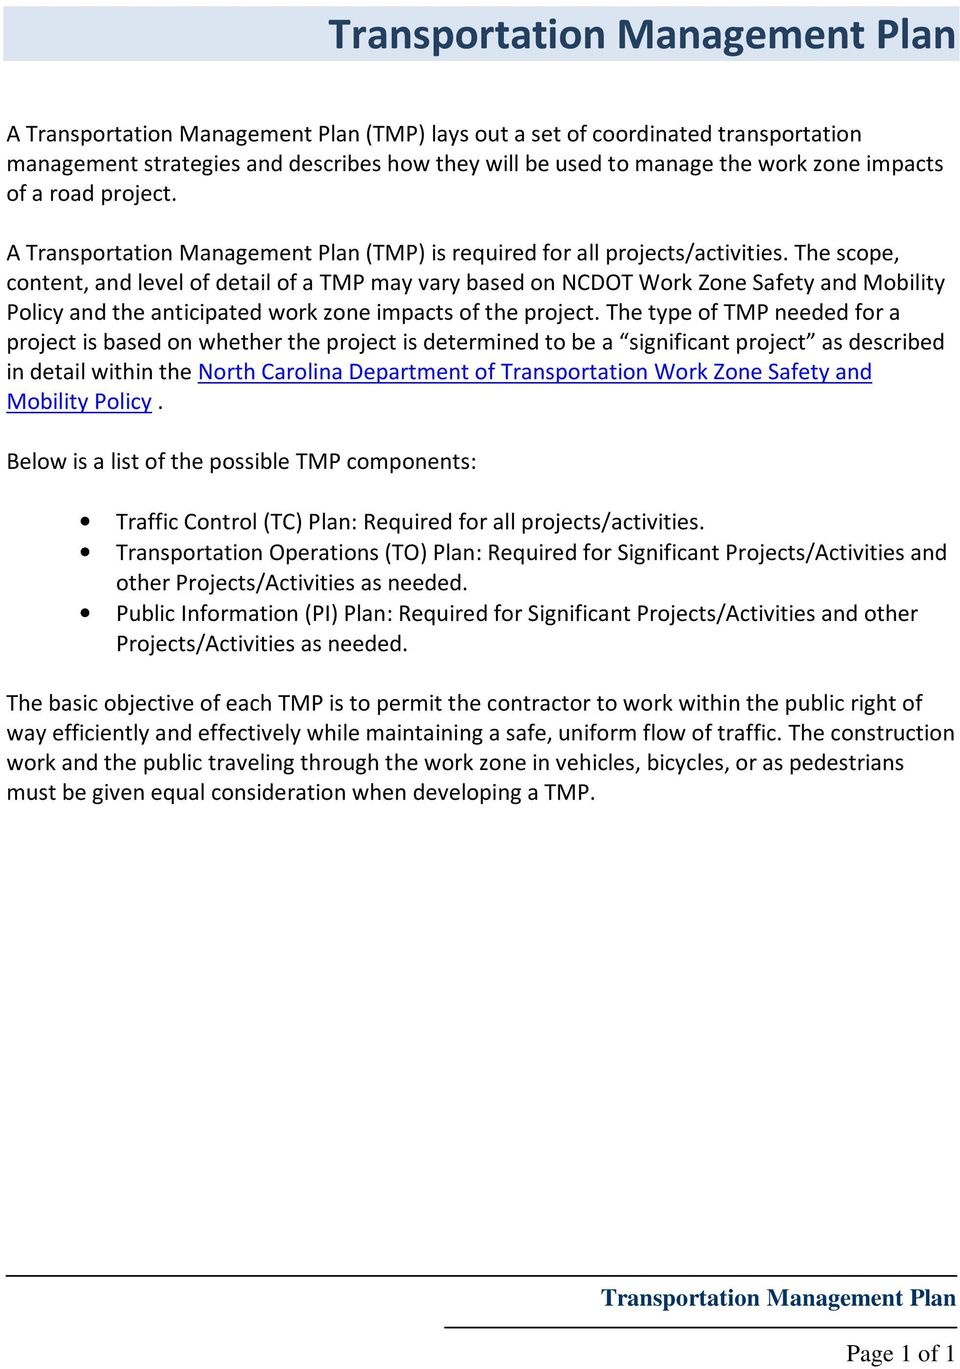 The scope, content, and level of detail of a TMP may vary based on NCDOT Work Zone Safety and Mobility Policy and the anticipated work zone impacts of the project.